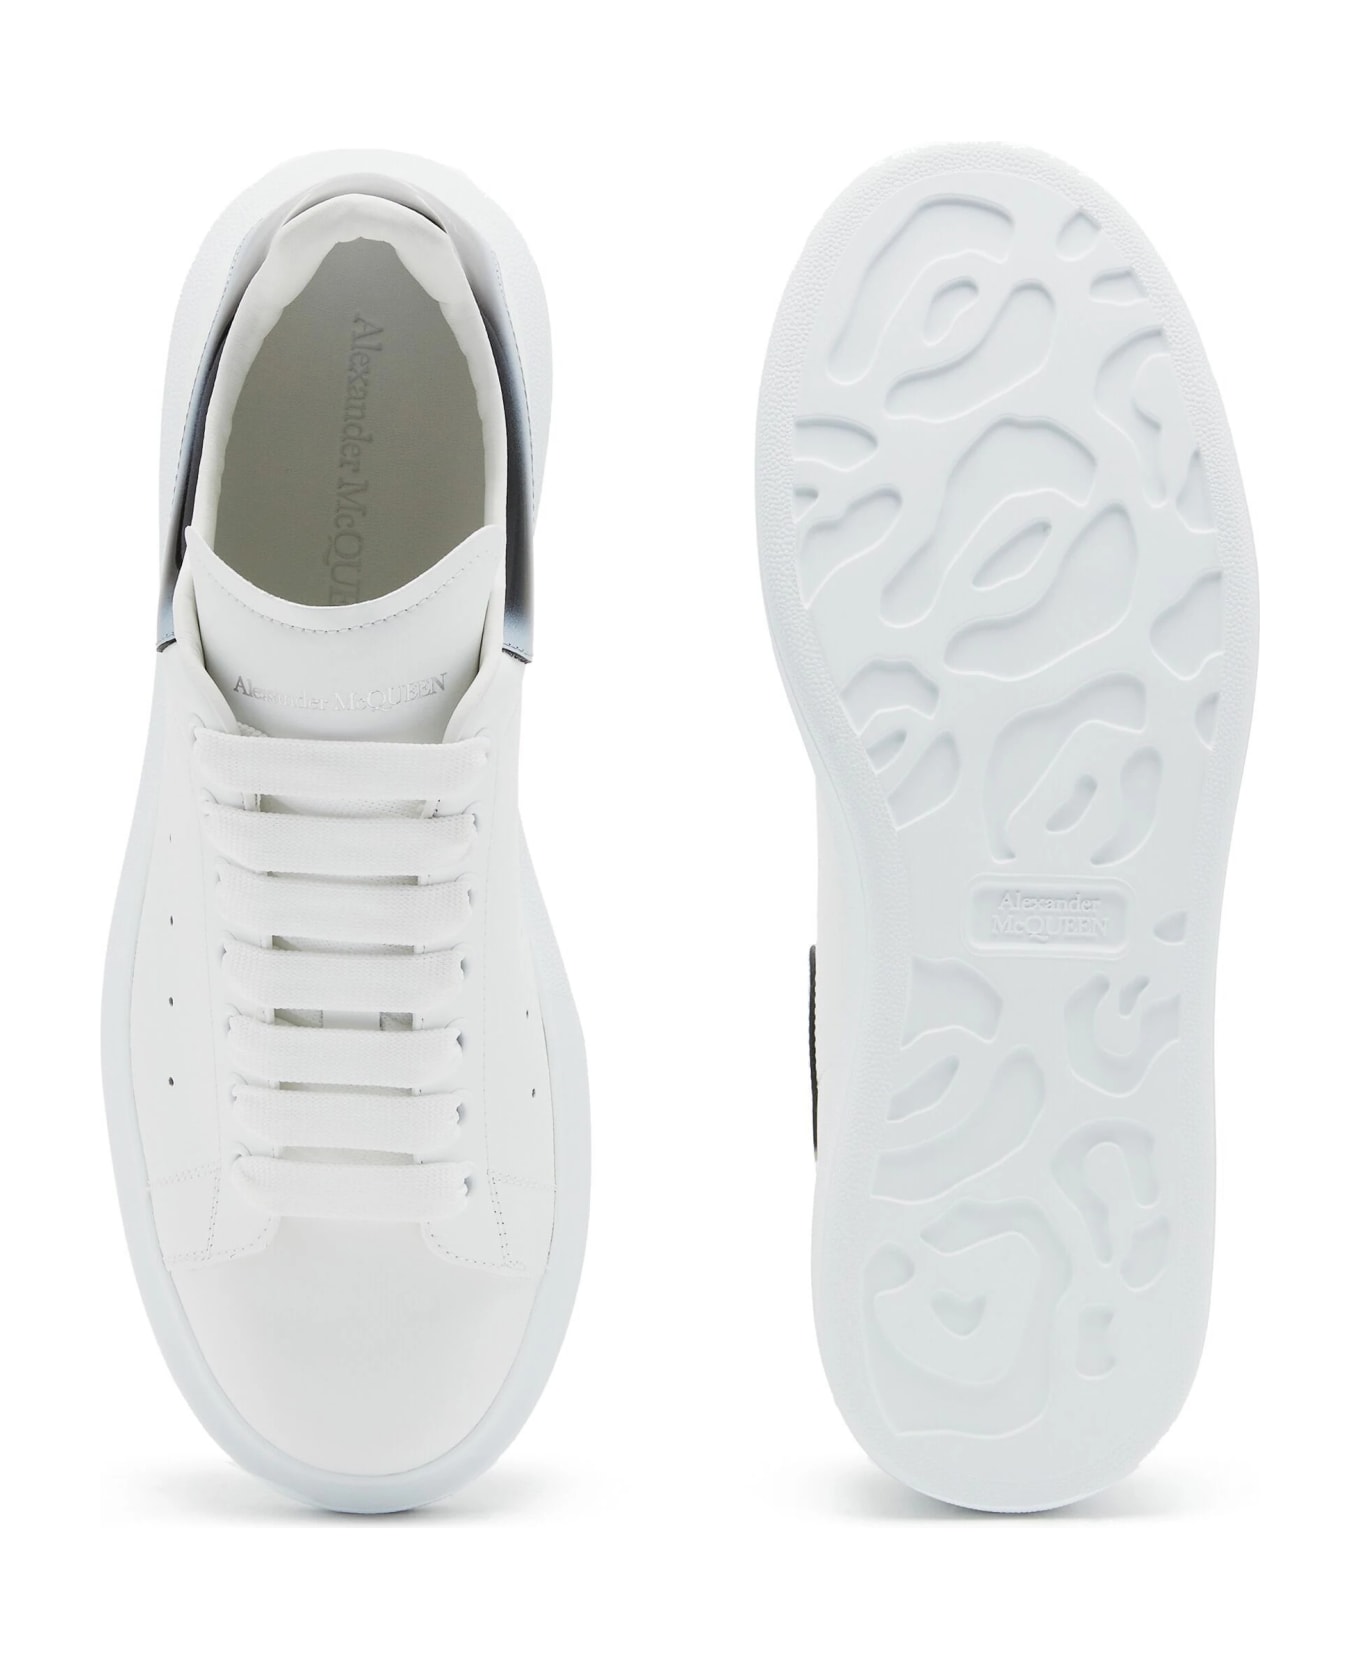 Alexander McQueen Oversized Sneakers In White And Black - White